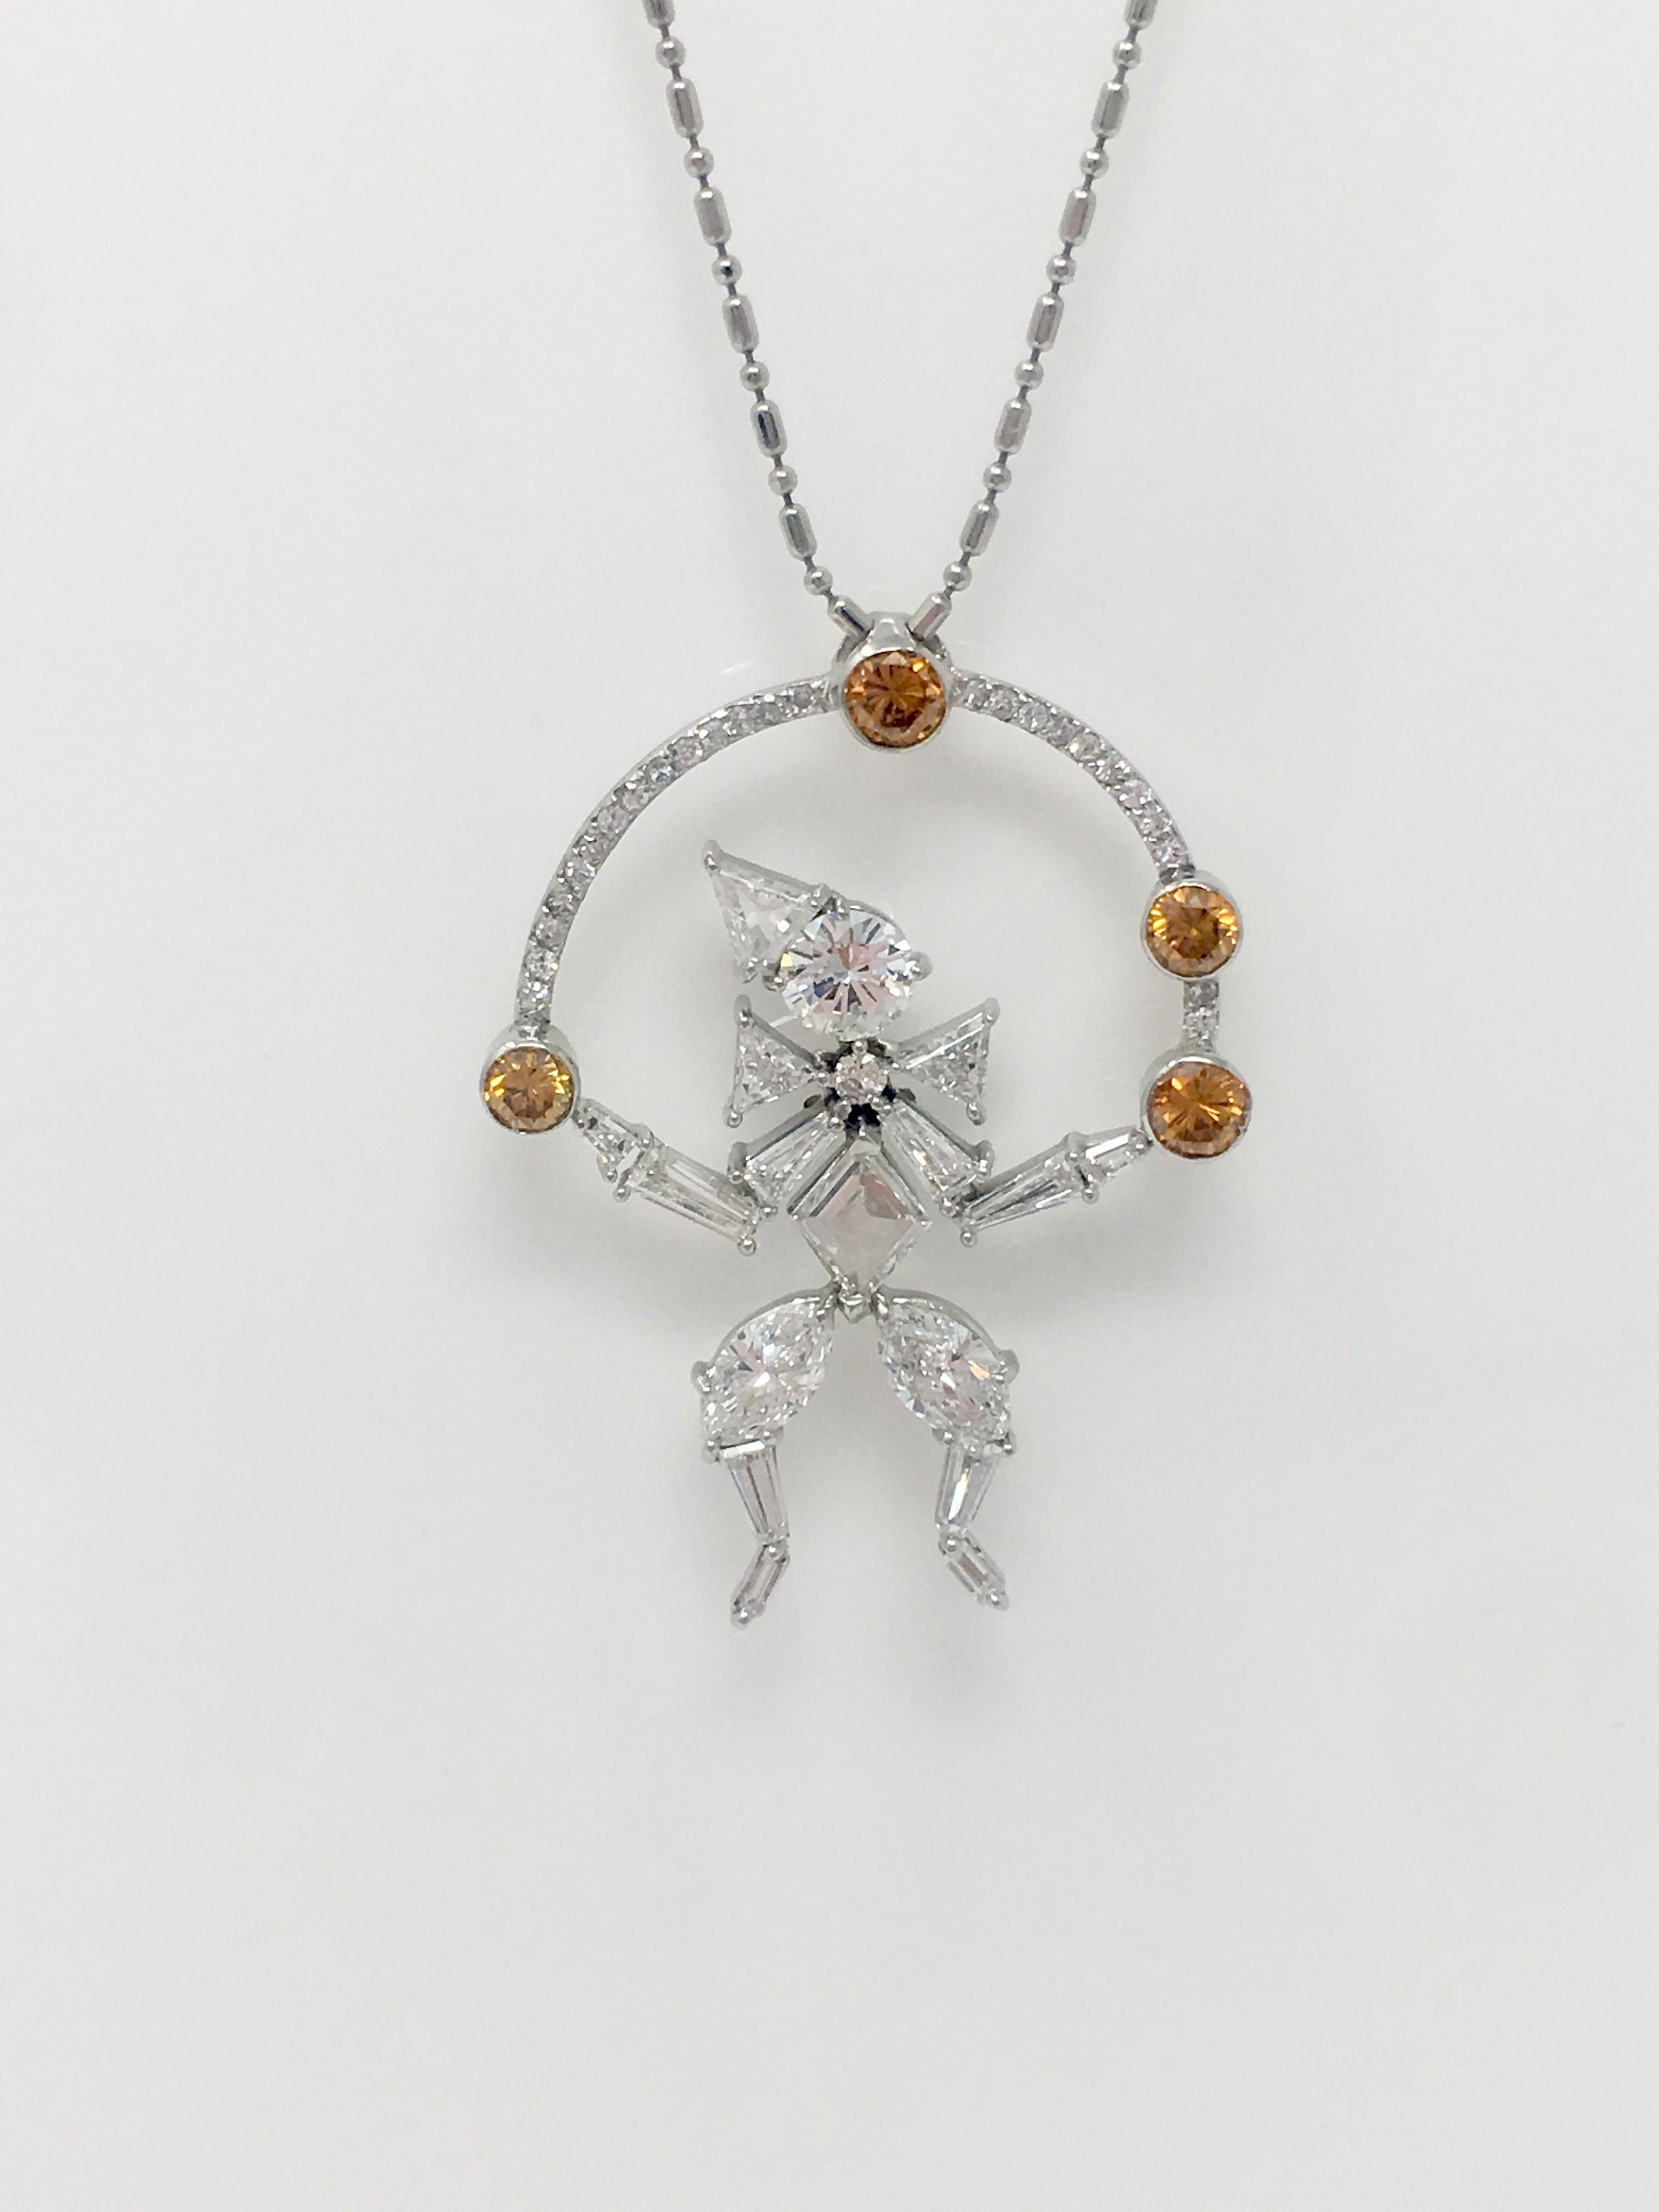 Contemporary 2.97 Carat White and Brown Diamond Juggling Clown Necklace in Platinum For Sale